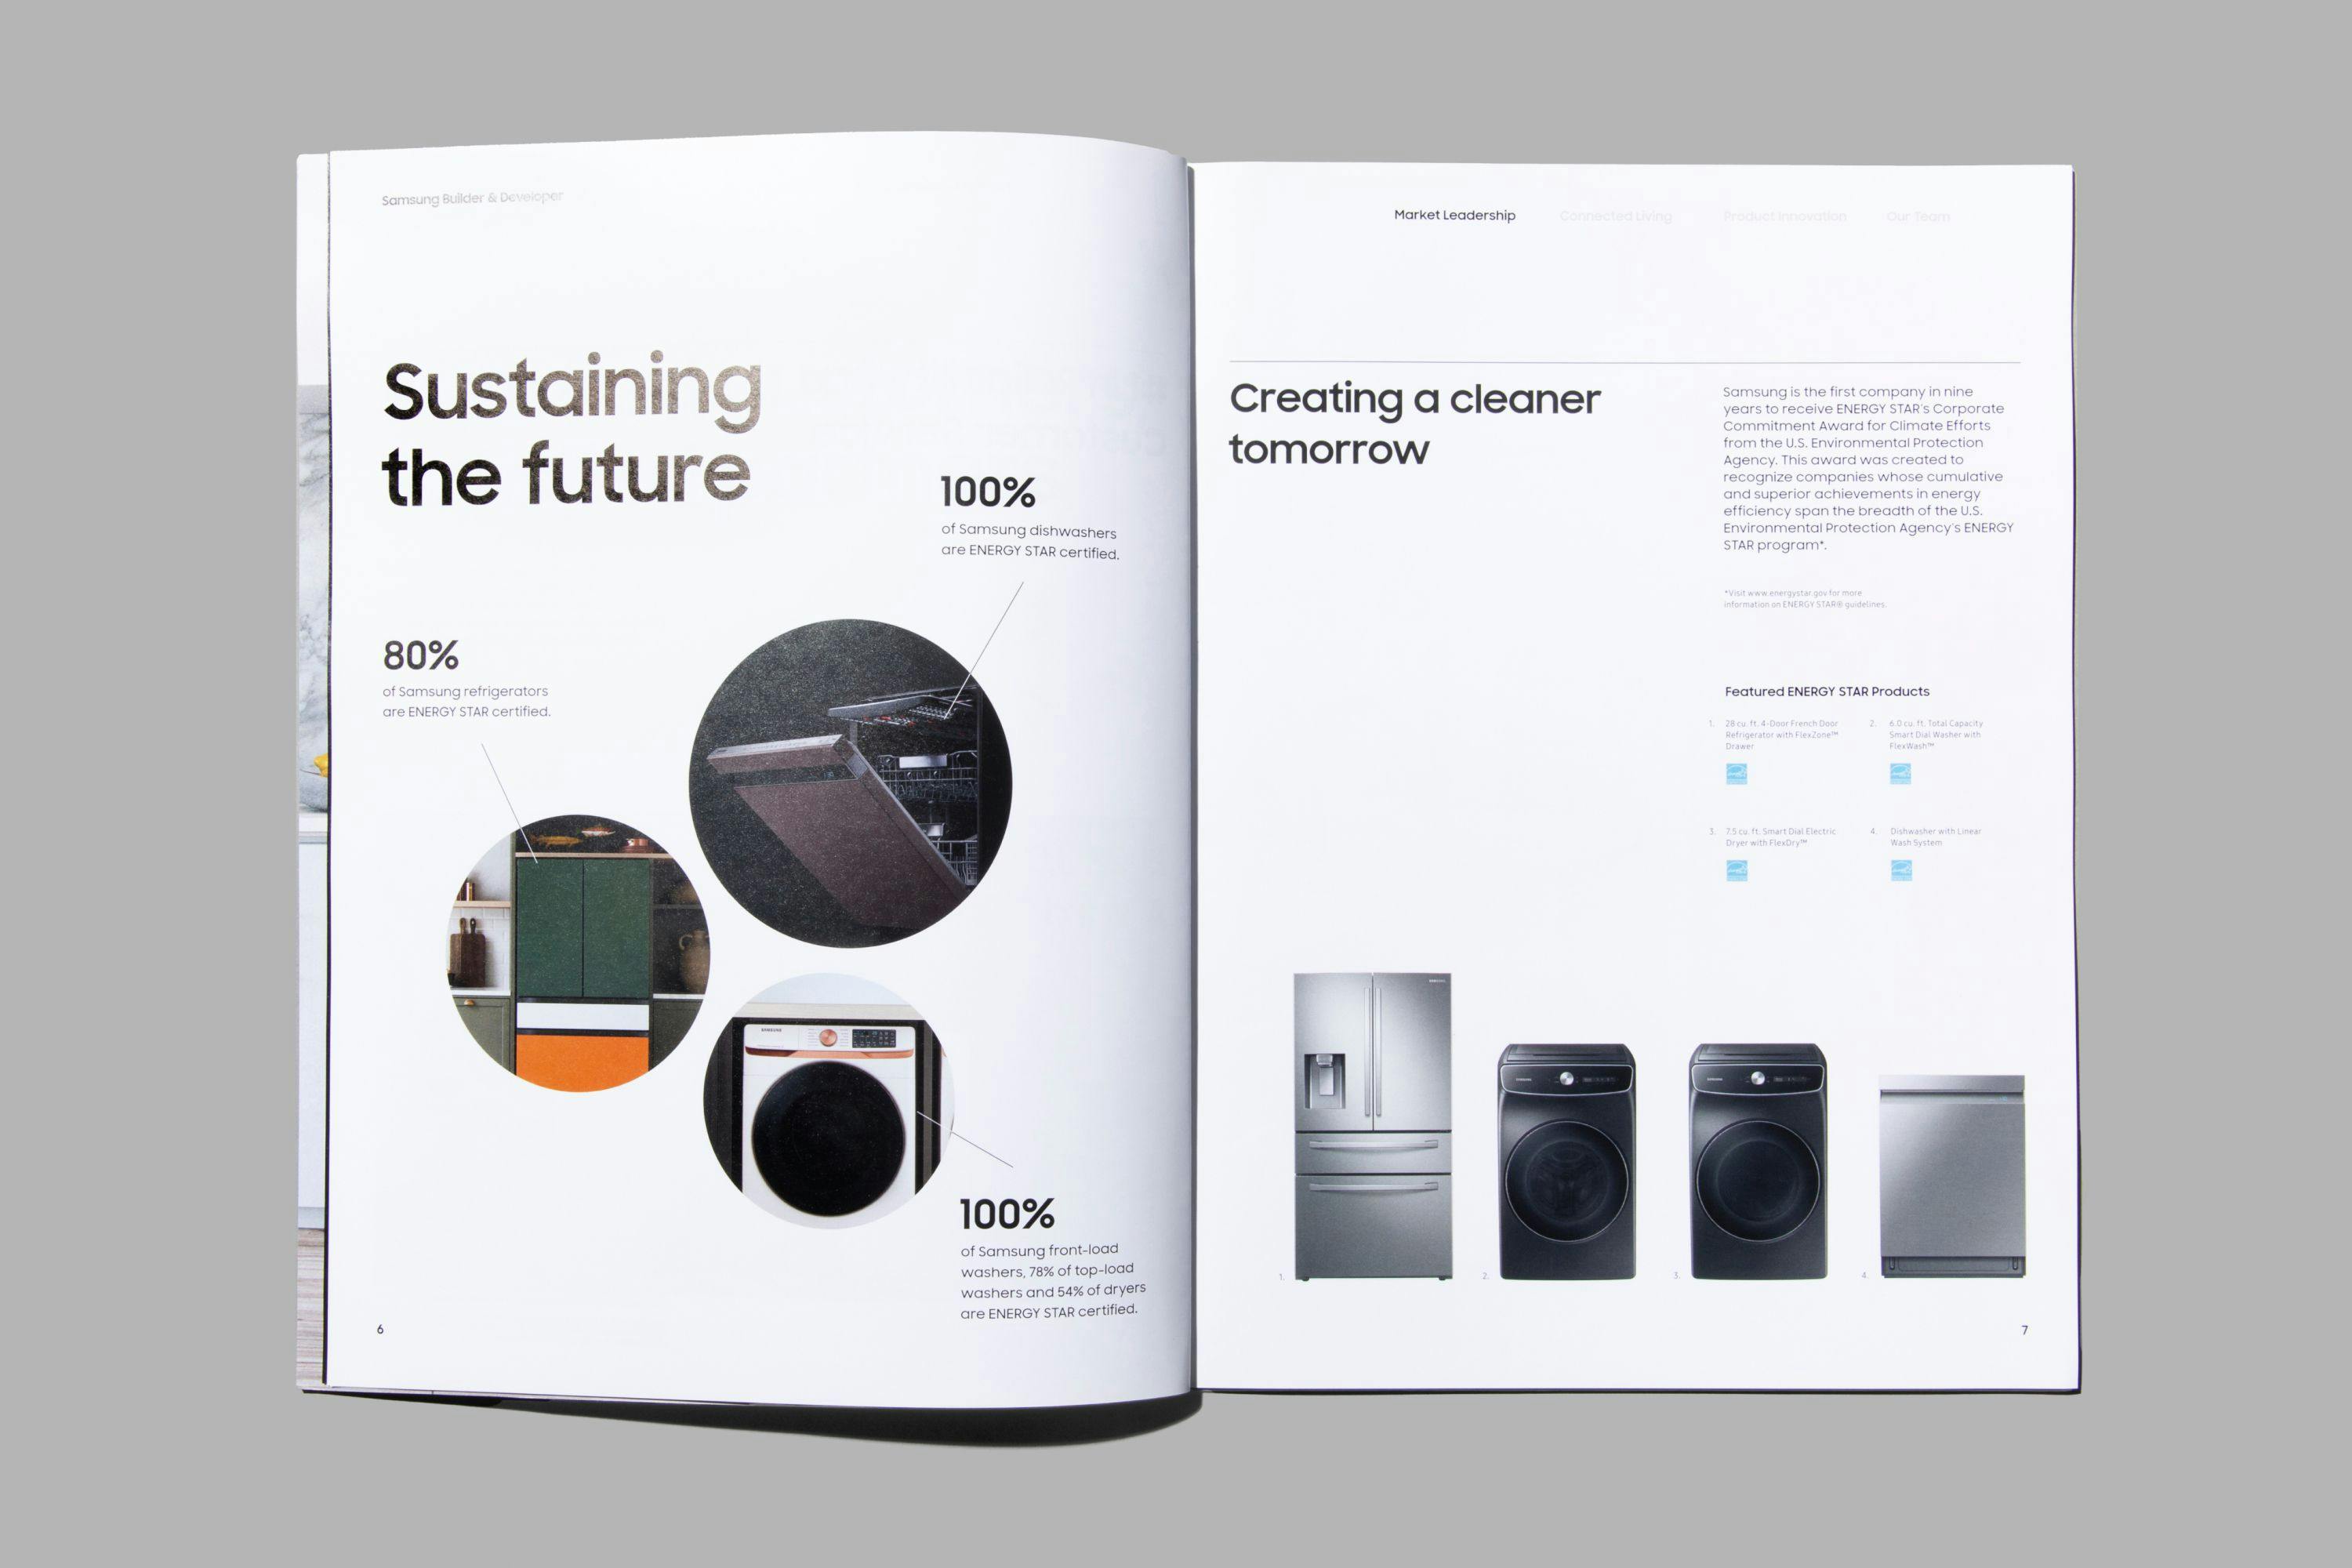 Samsung Builder Magazine Opened to a Page Titled, "Sustaining the Future"